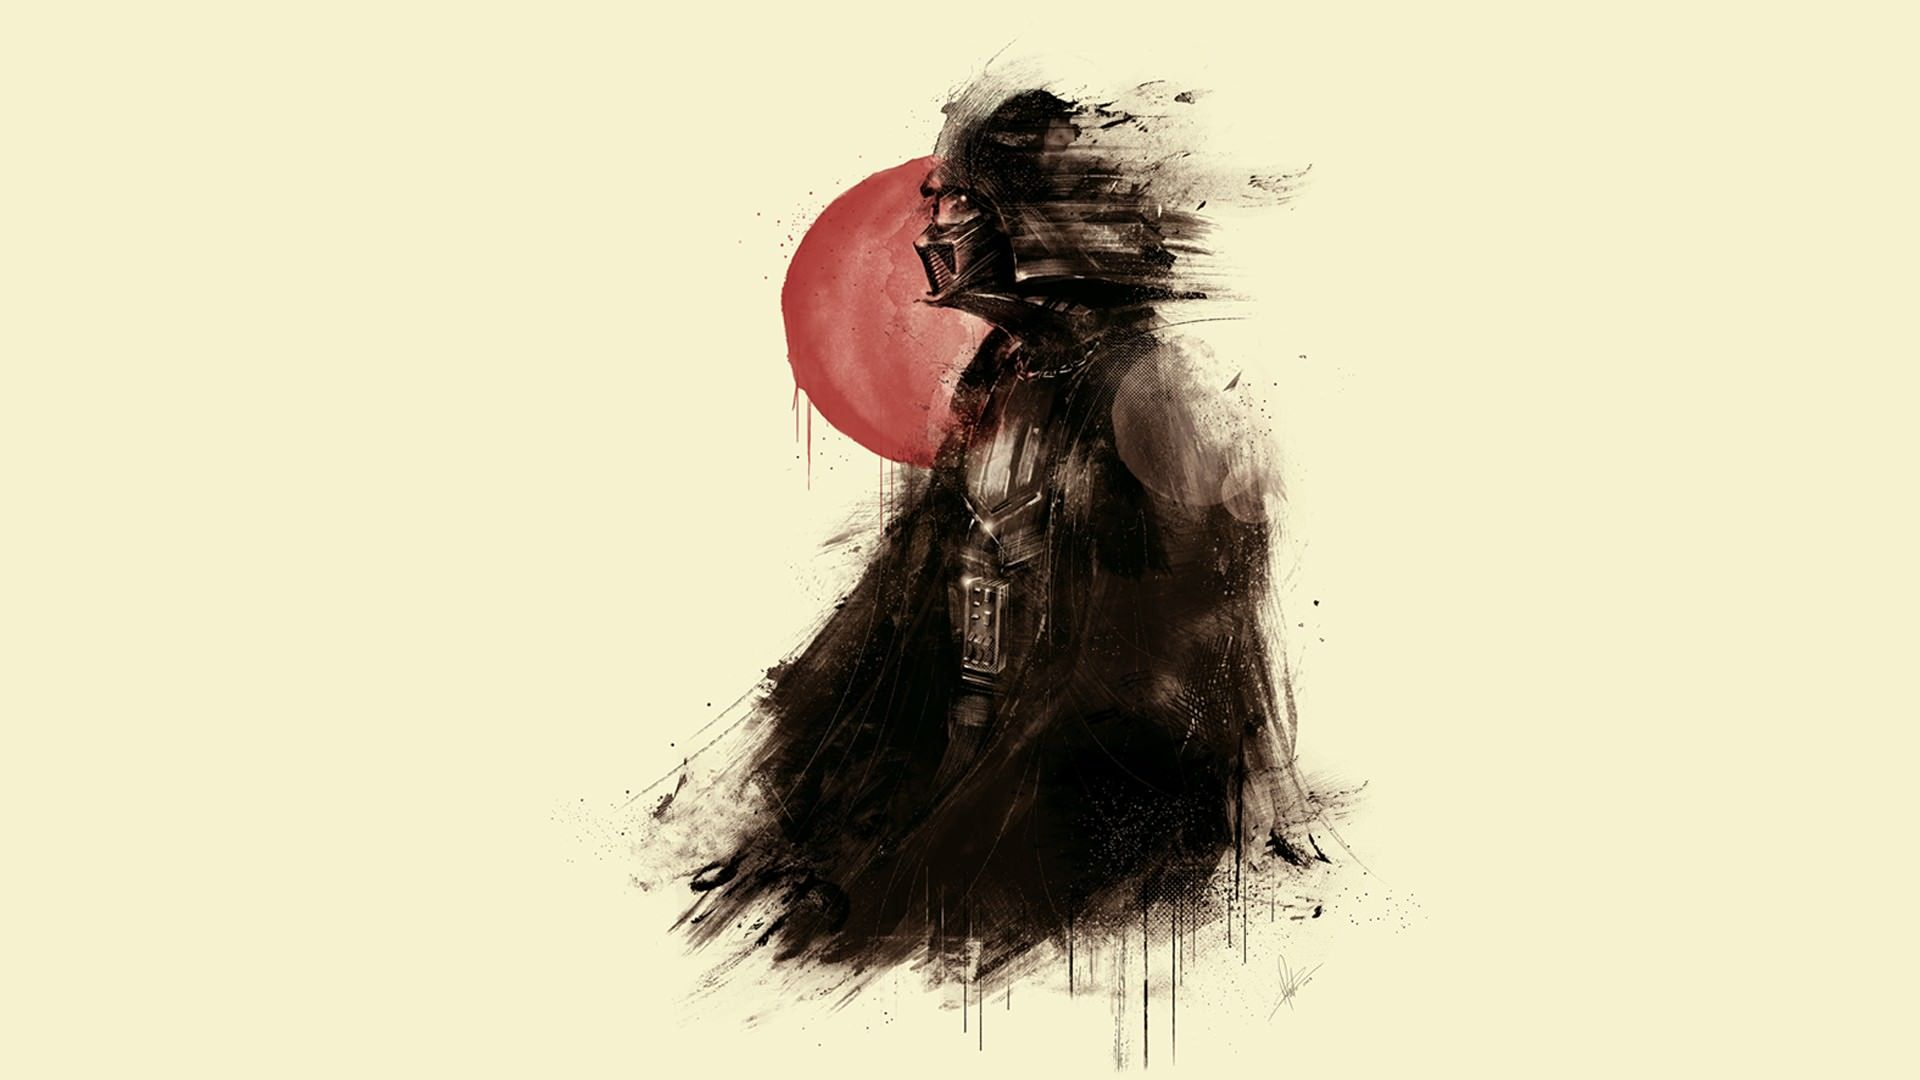 1920x1080 Produced by a Star Wars fan, this Darth Vader wallpaper has been created in an old Japanese artwork style. &acirc;&#128;&brvbar; | Star wars fan art, Star wars art, Star wars wallpaper